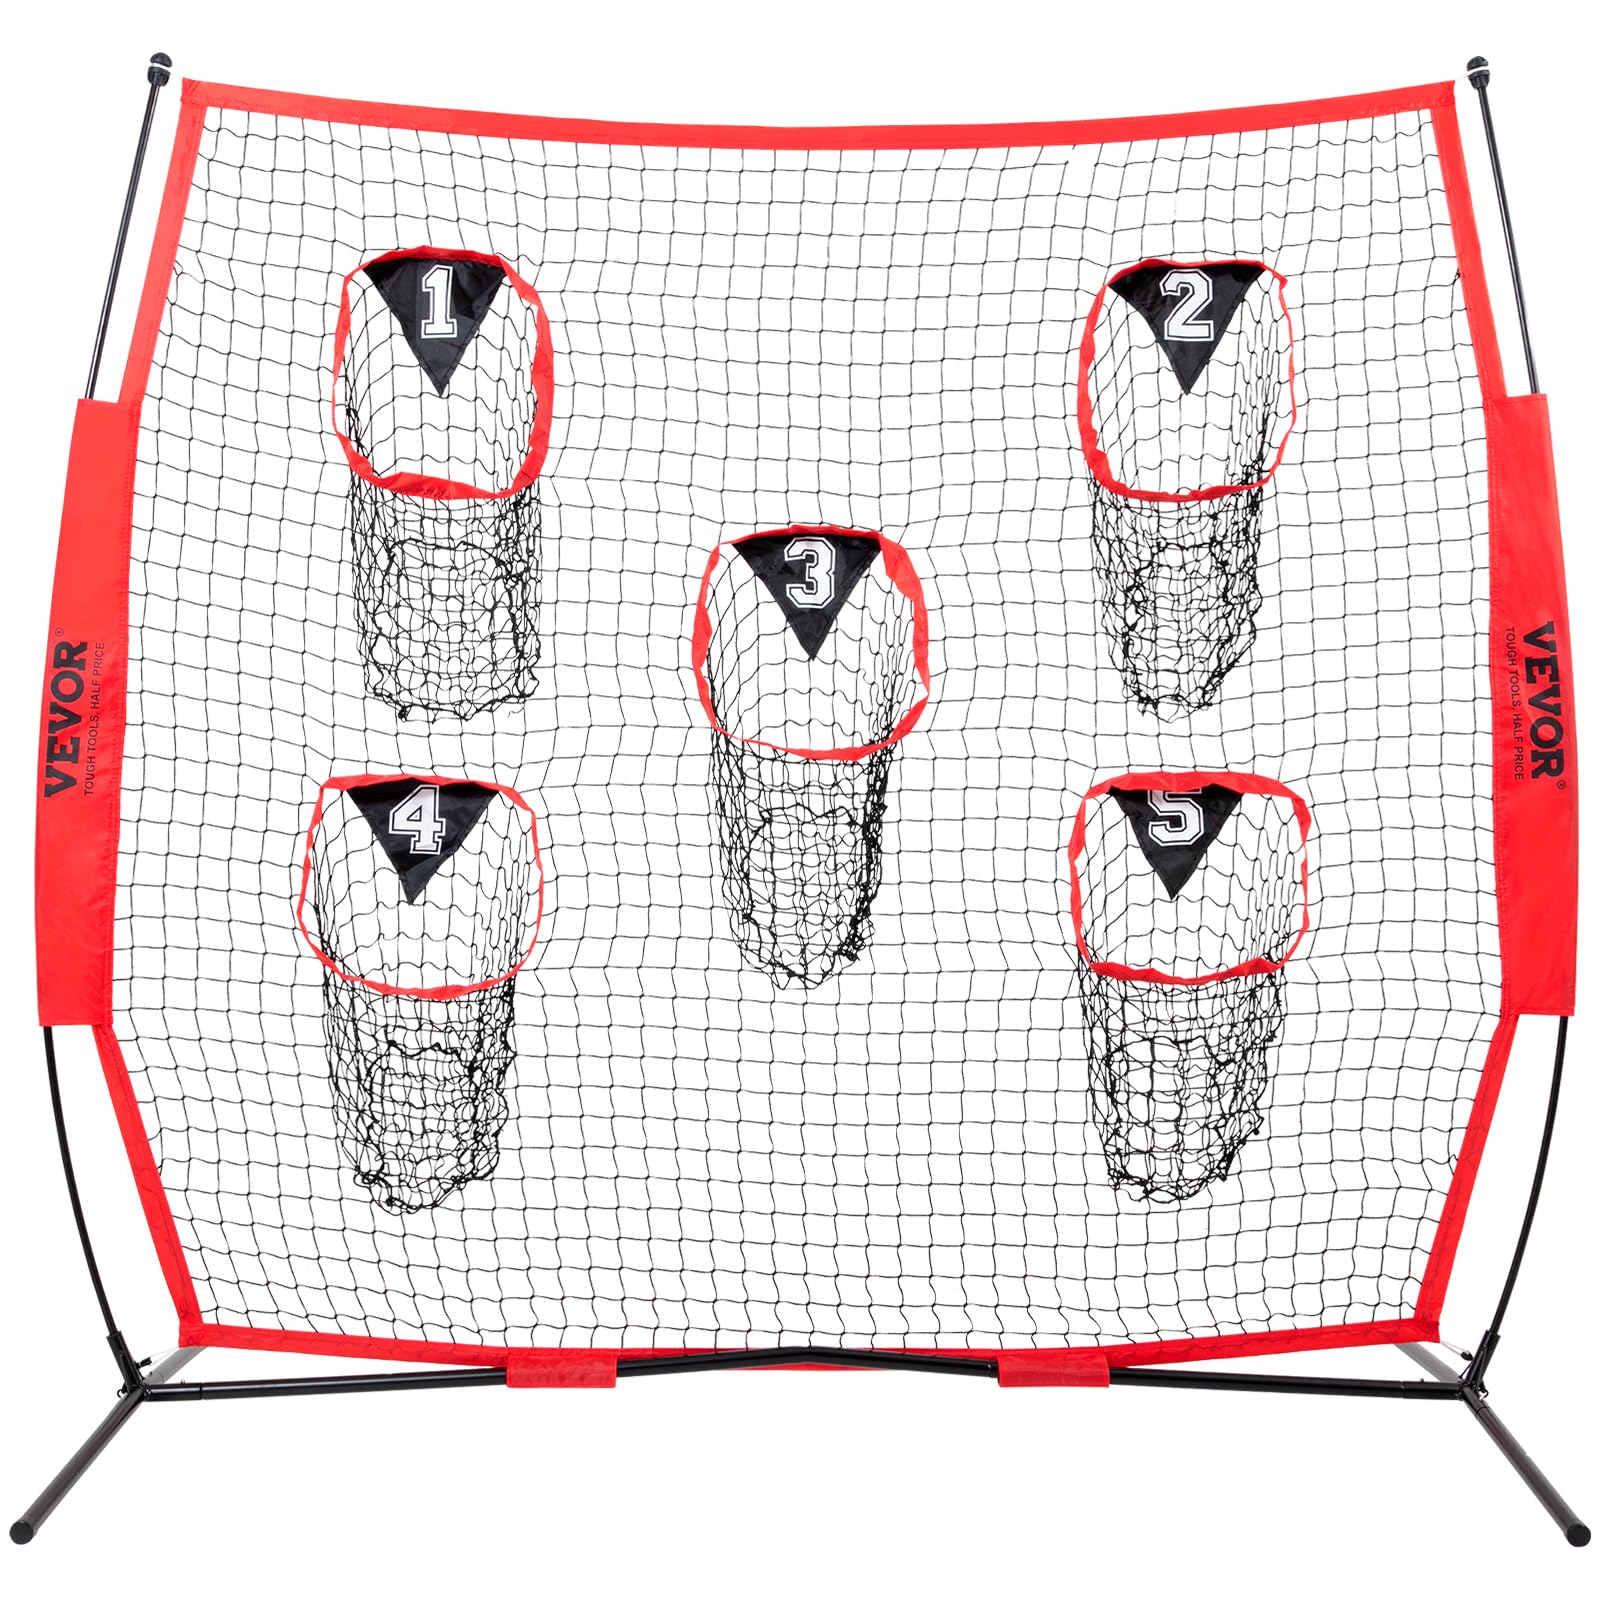 VEVOR Football Trainer Training Practice 5 Target Pockets, Knotless Net Includes Bow Frame and Portable Carry Case, Improve QB Throwing Accuracy, Red